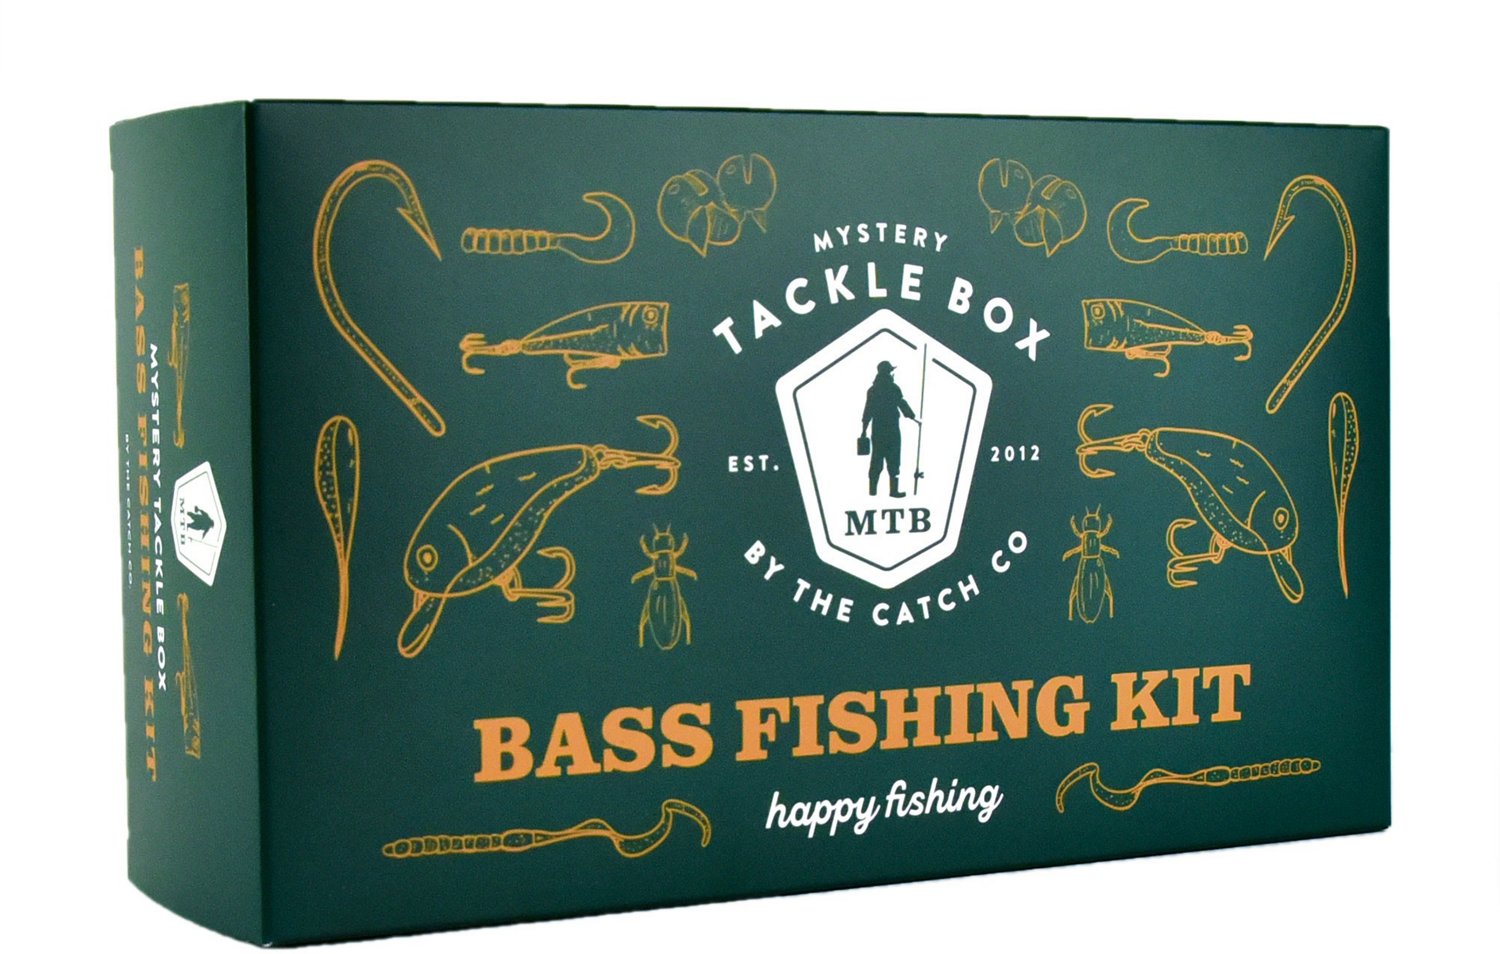 Fishing Clothing SALE  Clearance Offers - The Tackle Box